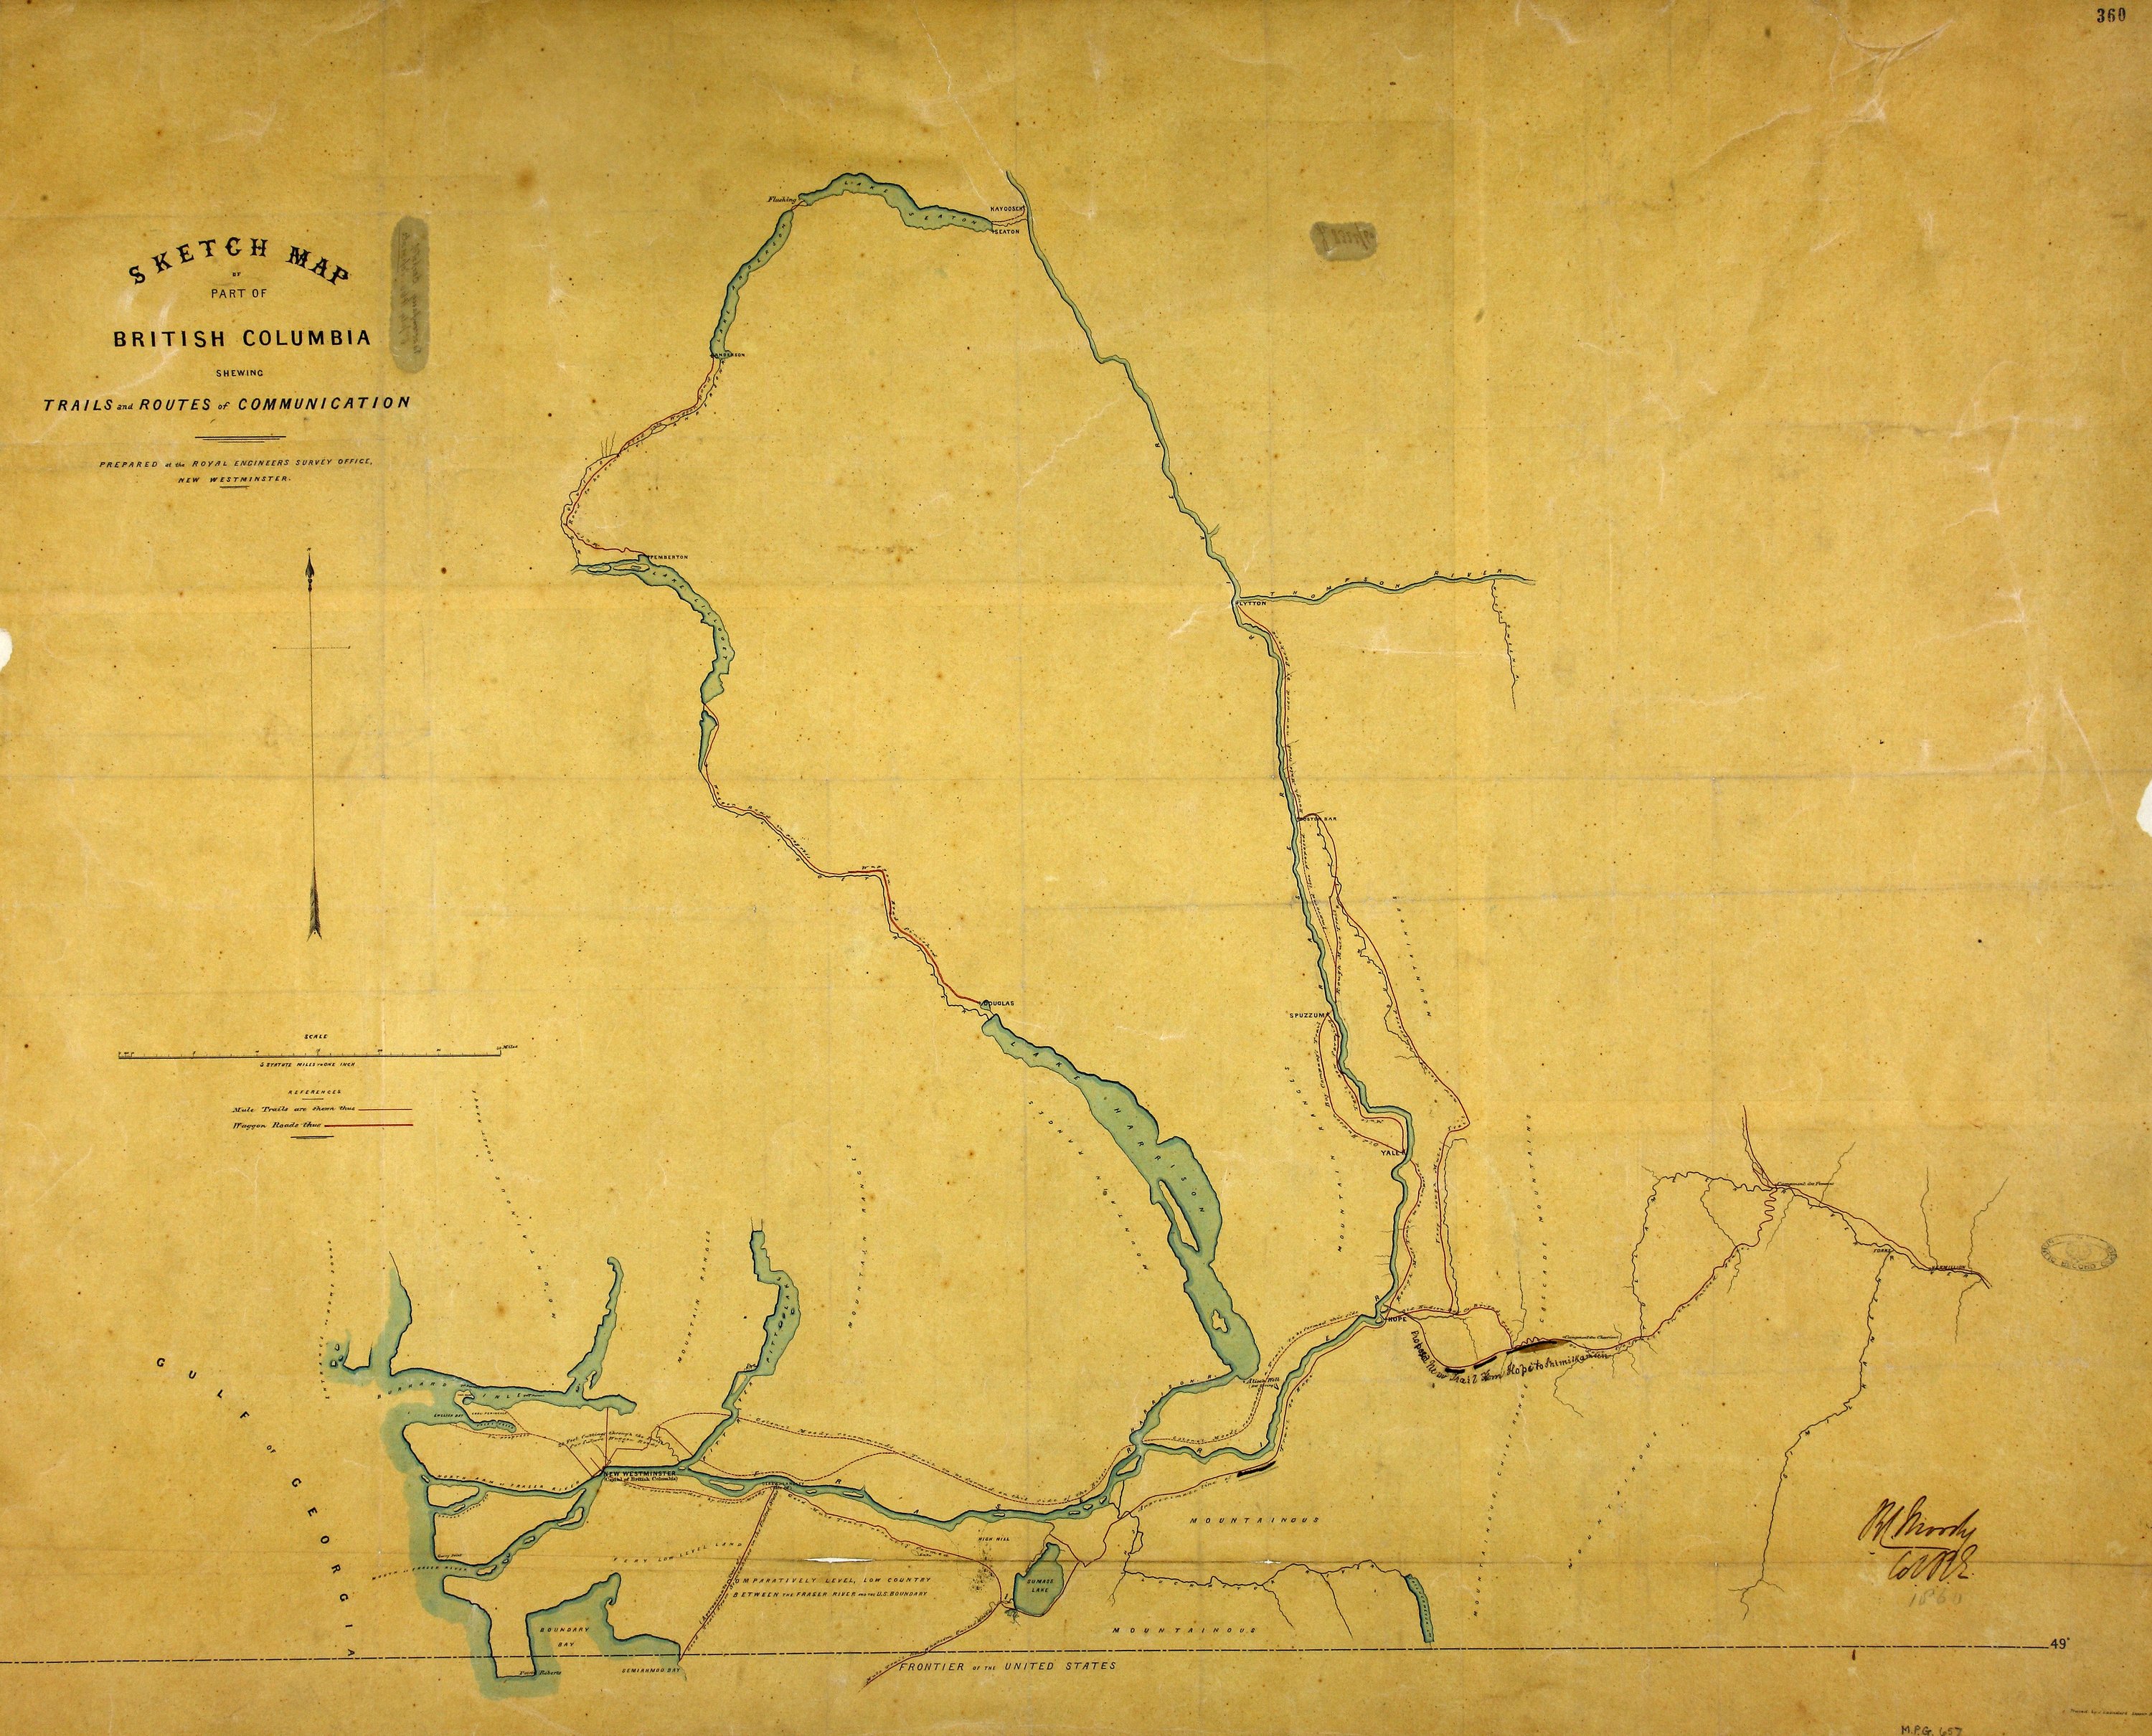 Sketch map of part of British Columbia shewing trails and routes of communication.